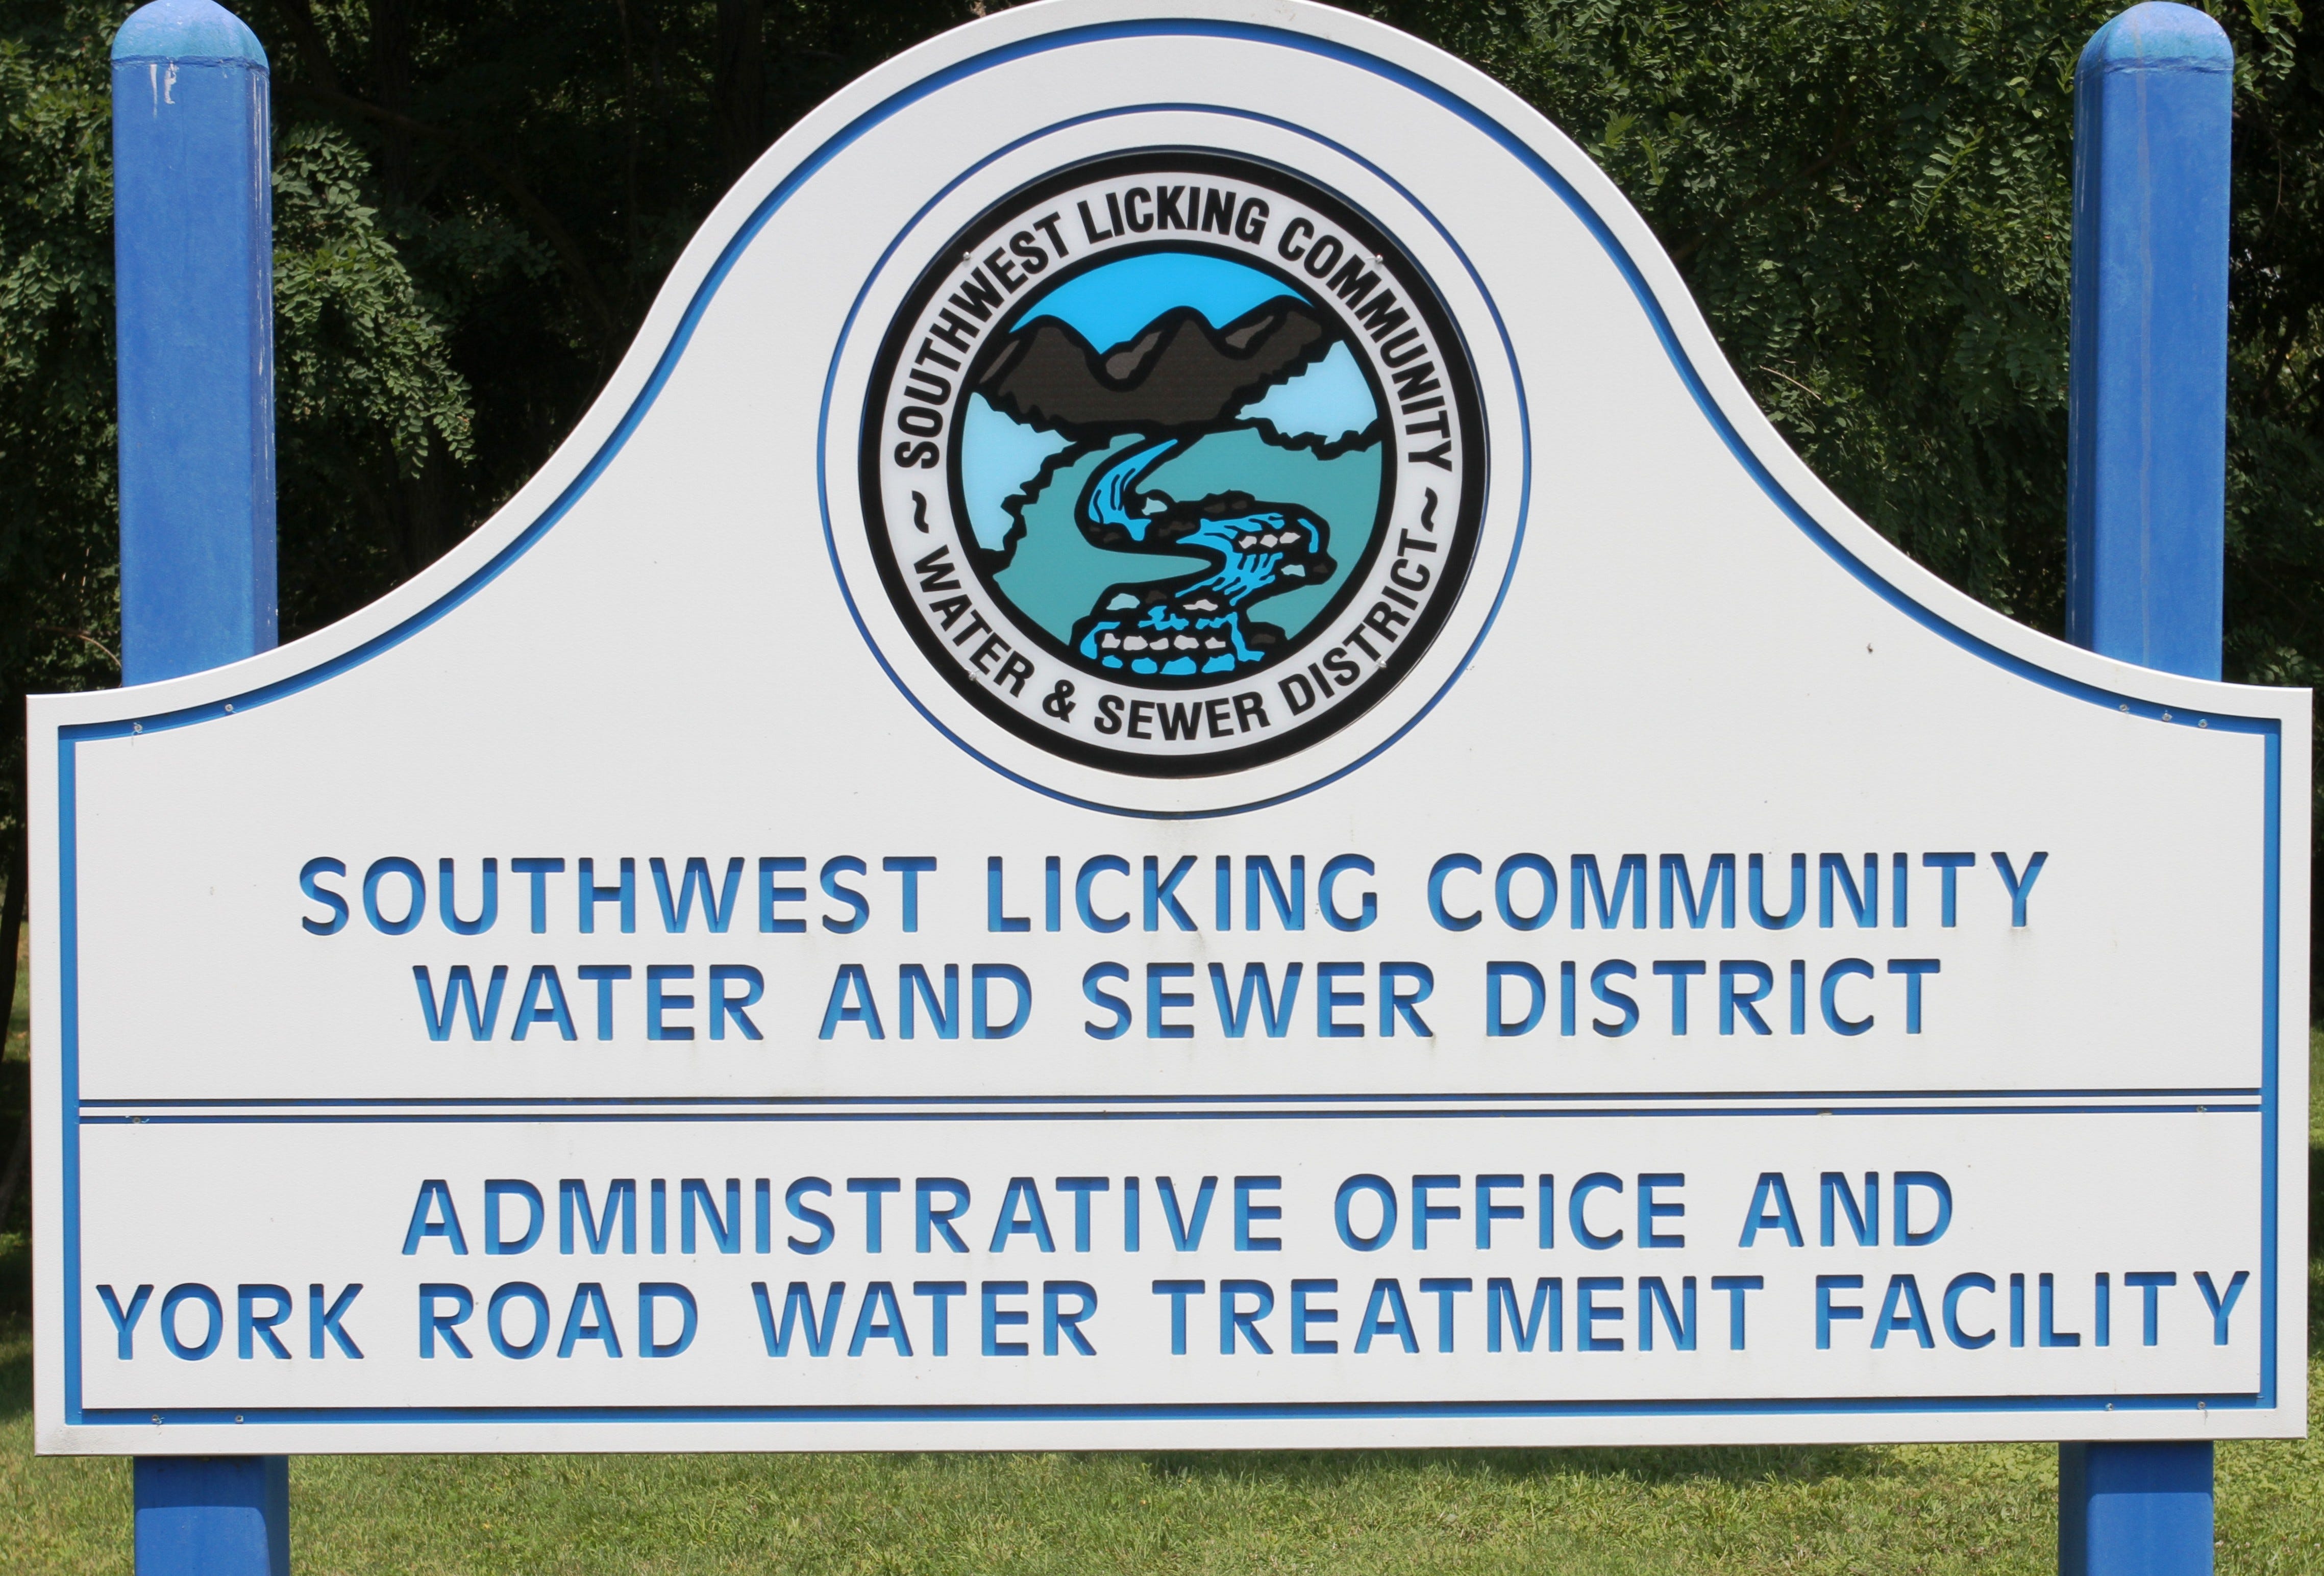 Despite potential conflict, Southwest Licking water and sewer board hires Carlisle - The Newark Advocate